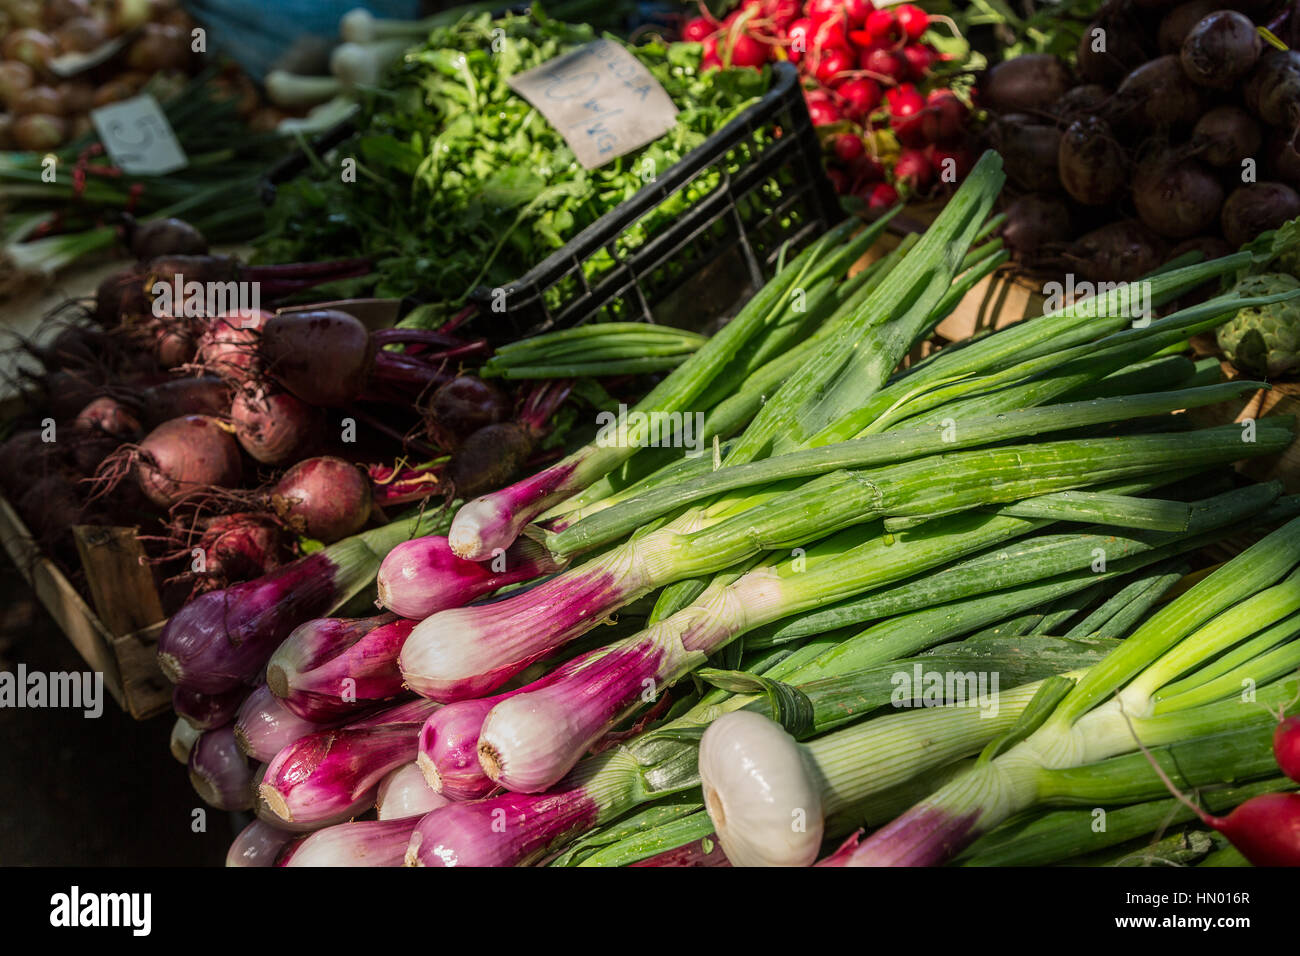 Red onions at market stall Stock Photo